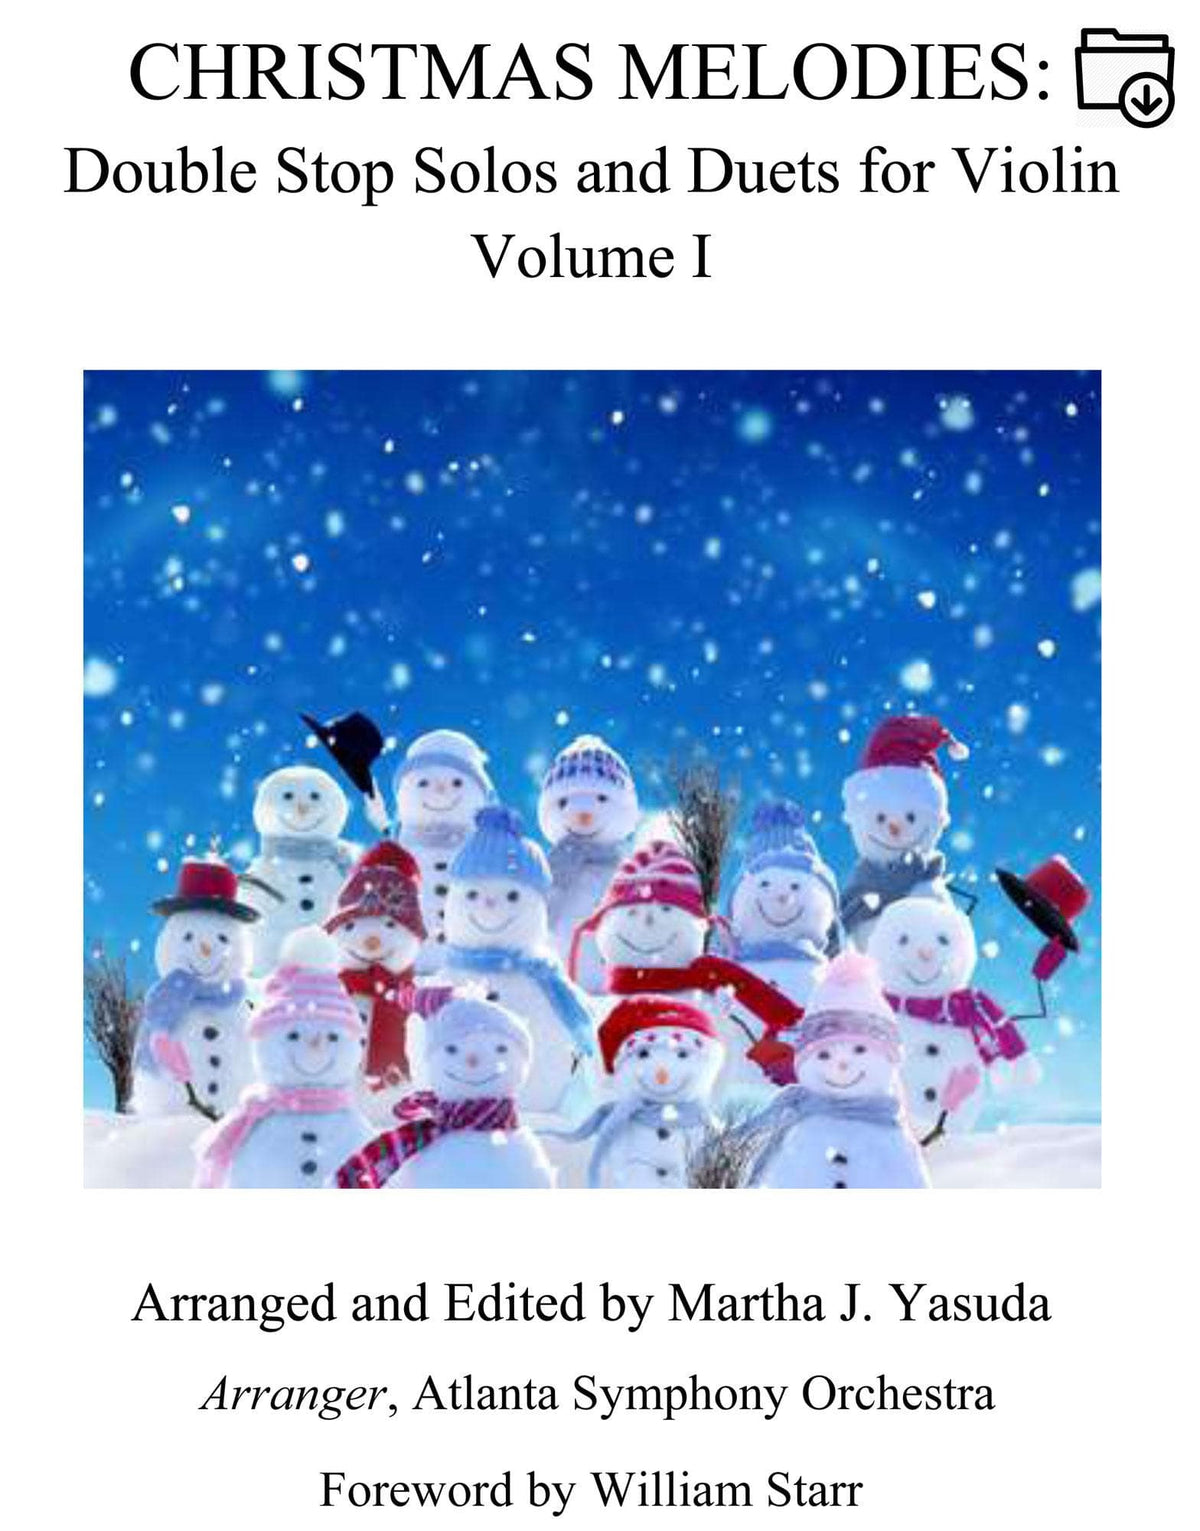 Yasuda - Christmas Melodies: Double Stop Solos & Duets For Violin, Volume I - Dig. DL